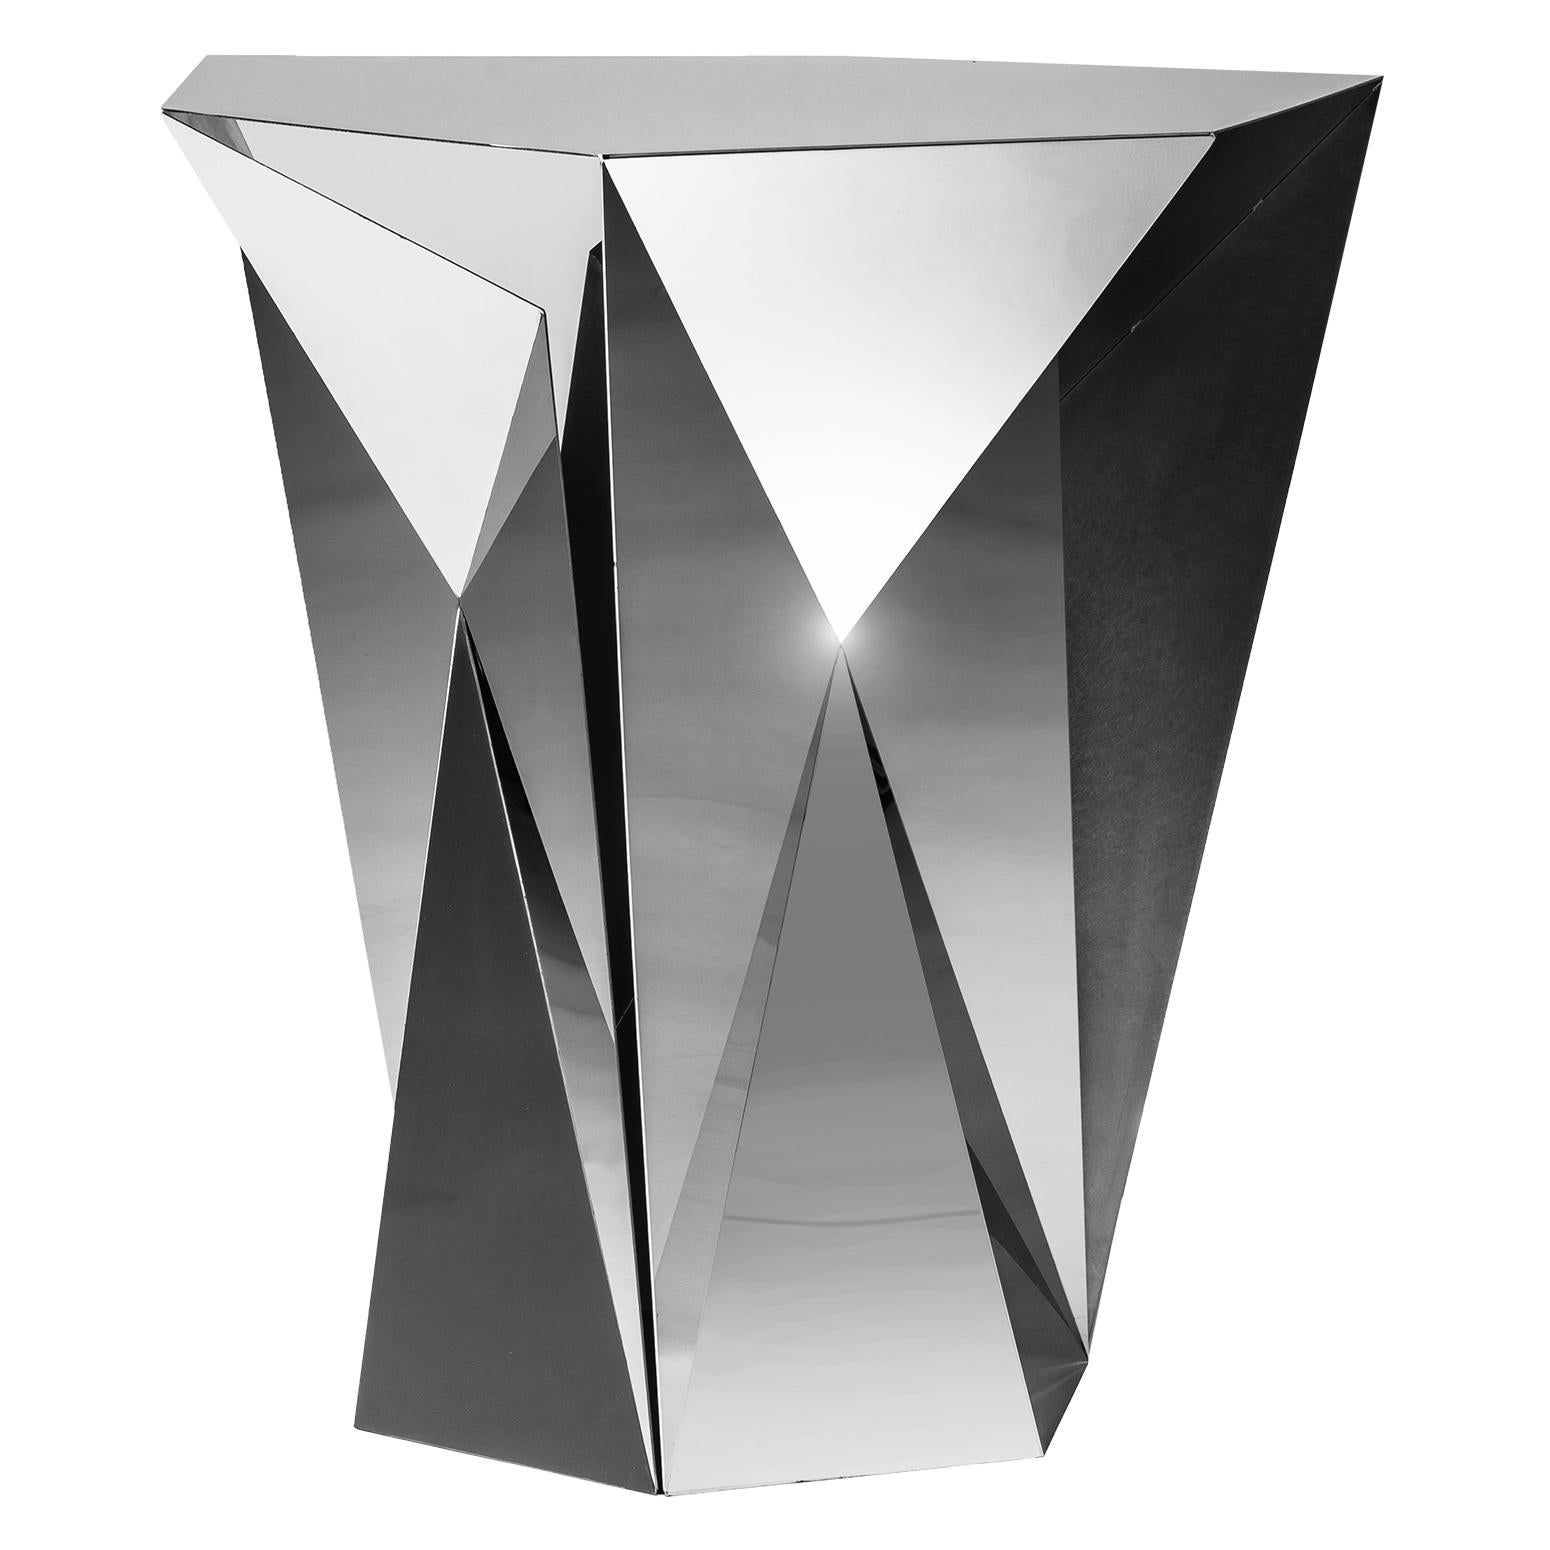 Object #MT-T6-S-S Mirror Polished Stainless Steel Side Table by Zhoujie Zhang